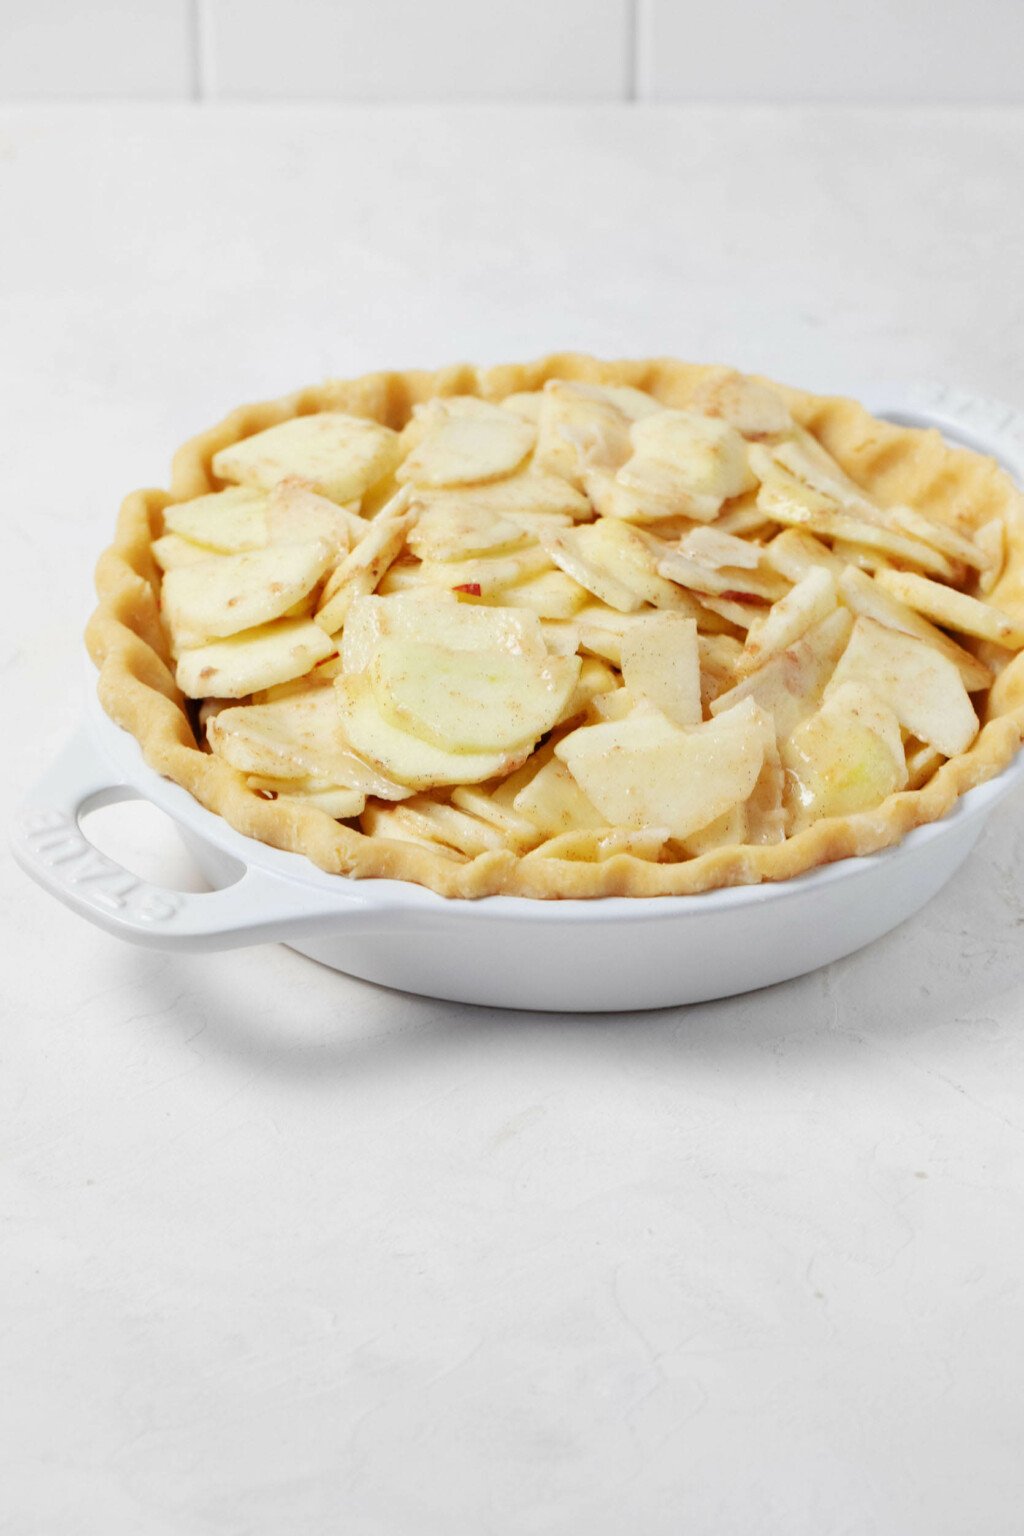 An angled image of a white pie plate, which has been filled with thinly sliced, glazed apples.